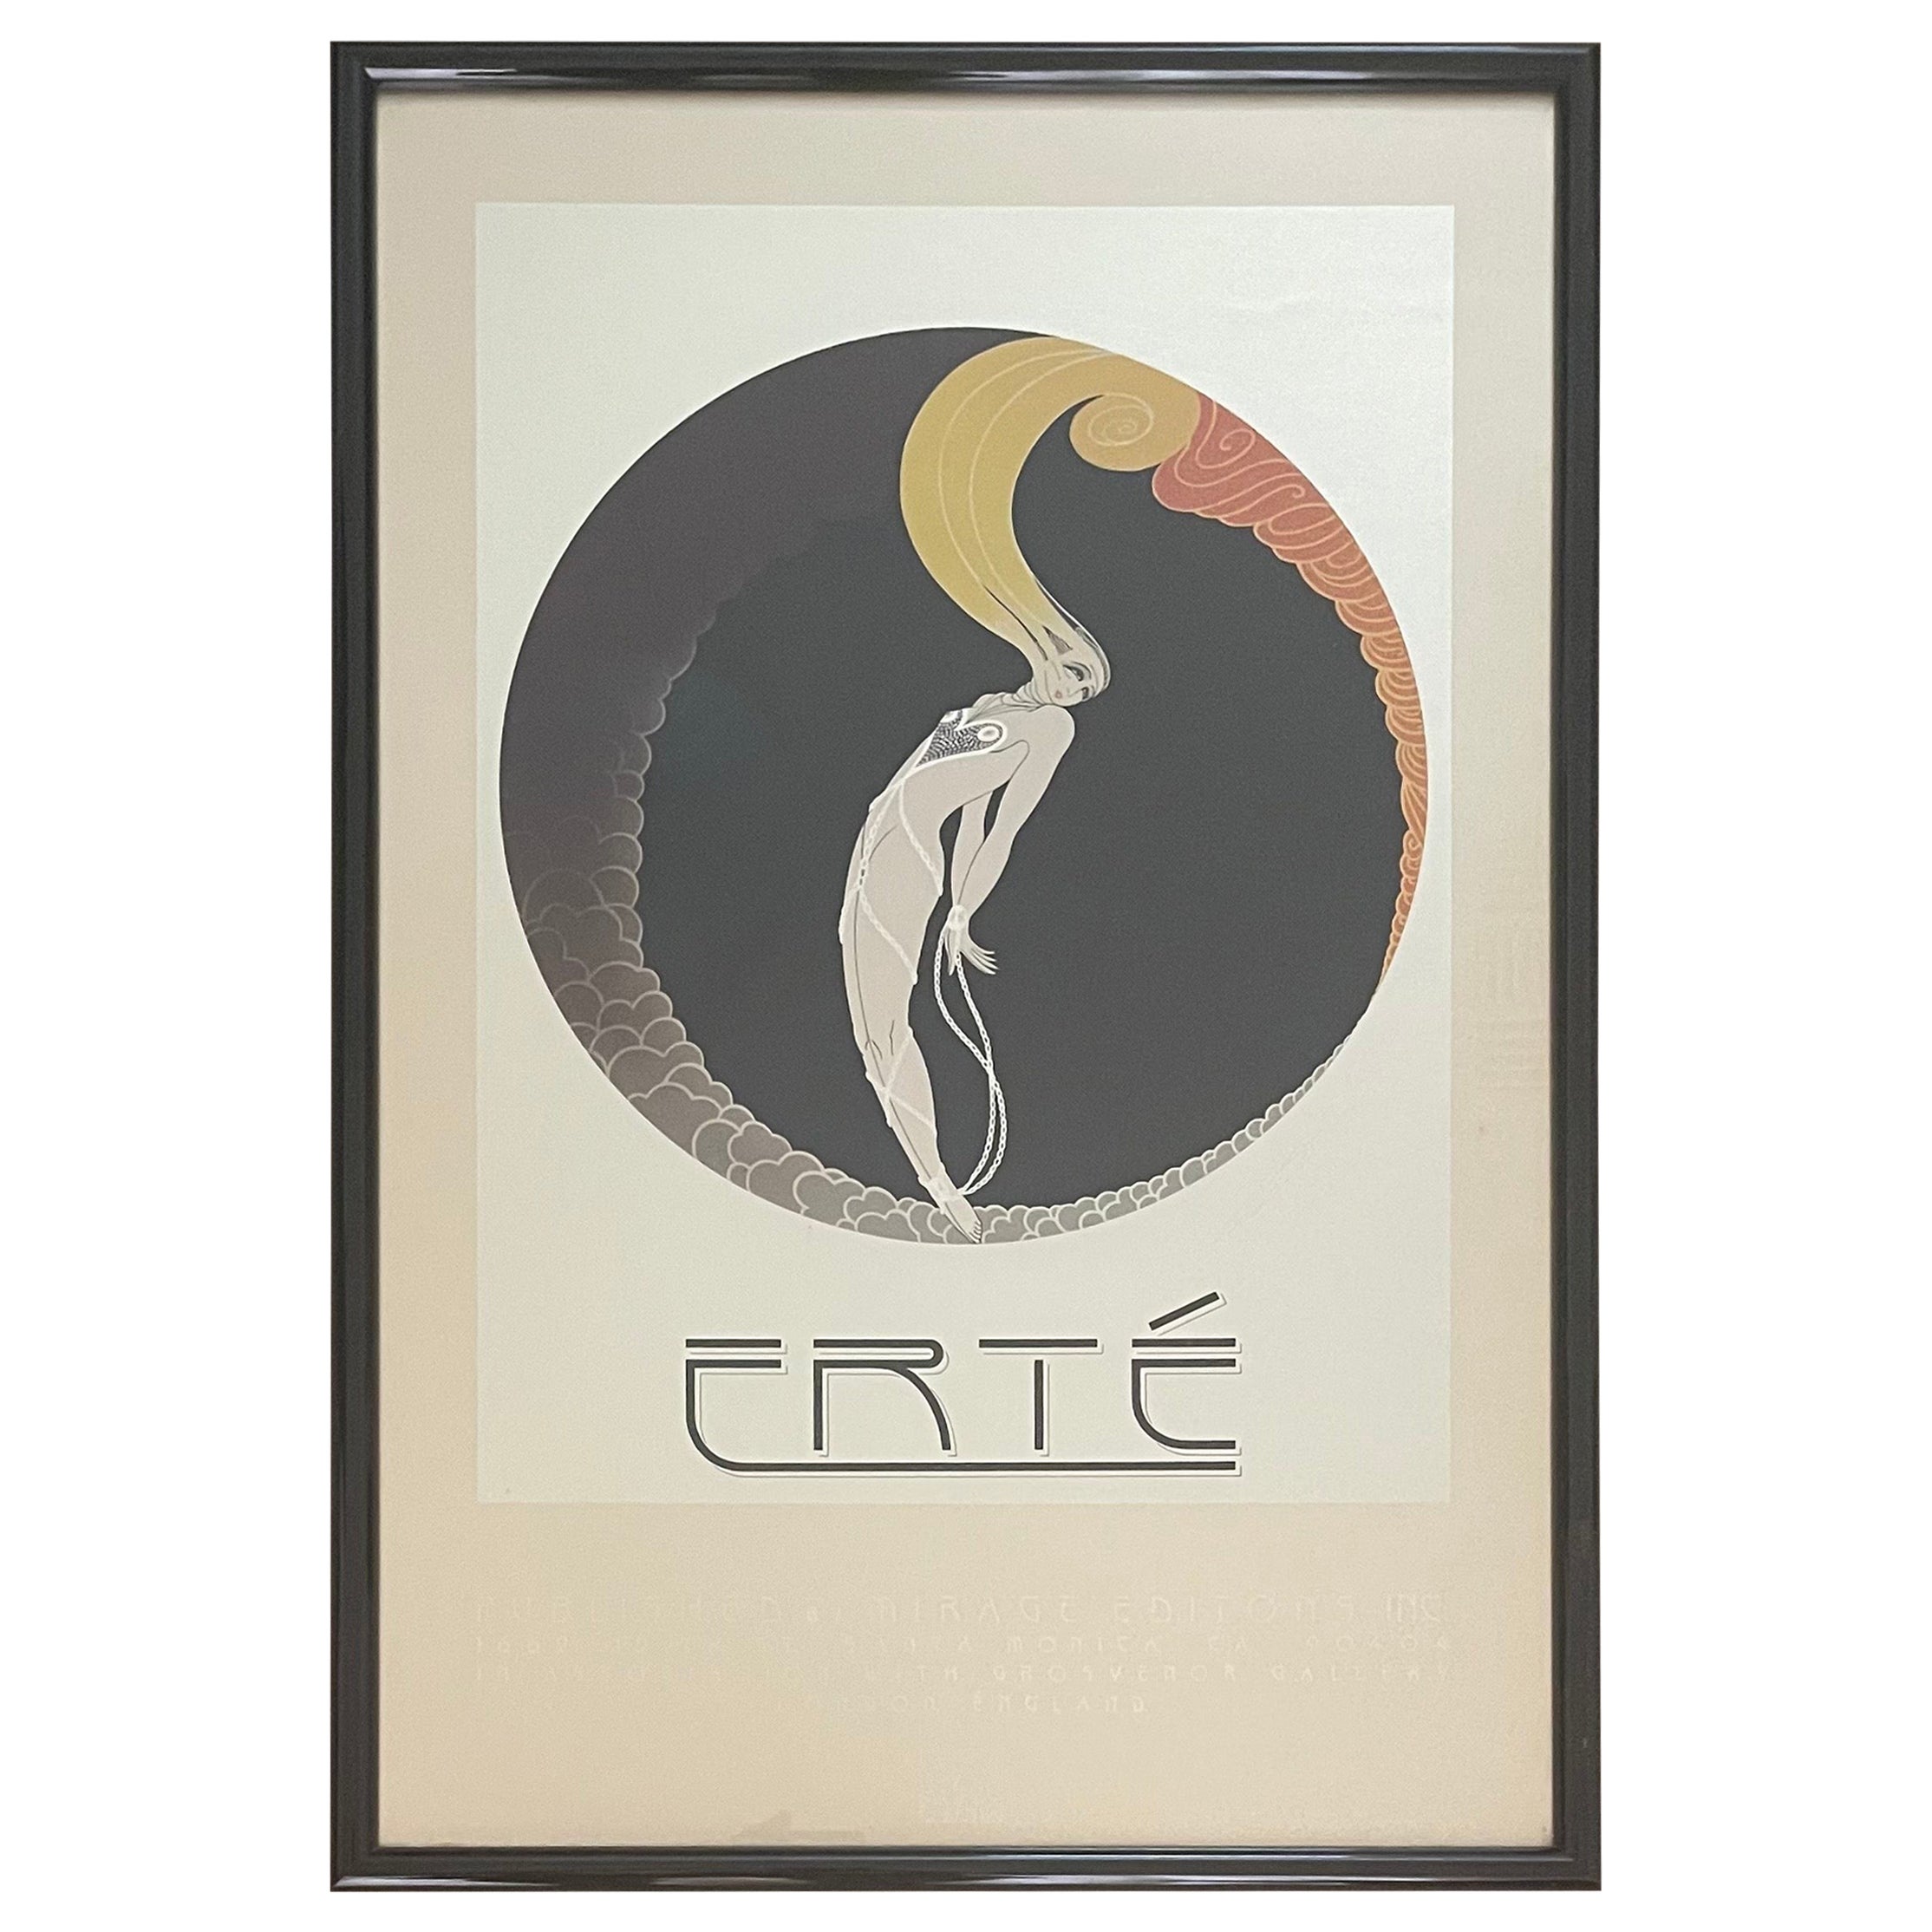 Erte Series "L'Amour" Poster by Mirage Editions for Grosvernor Gallery London